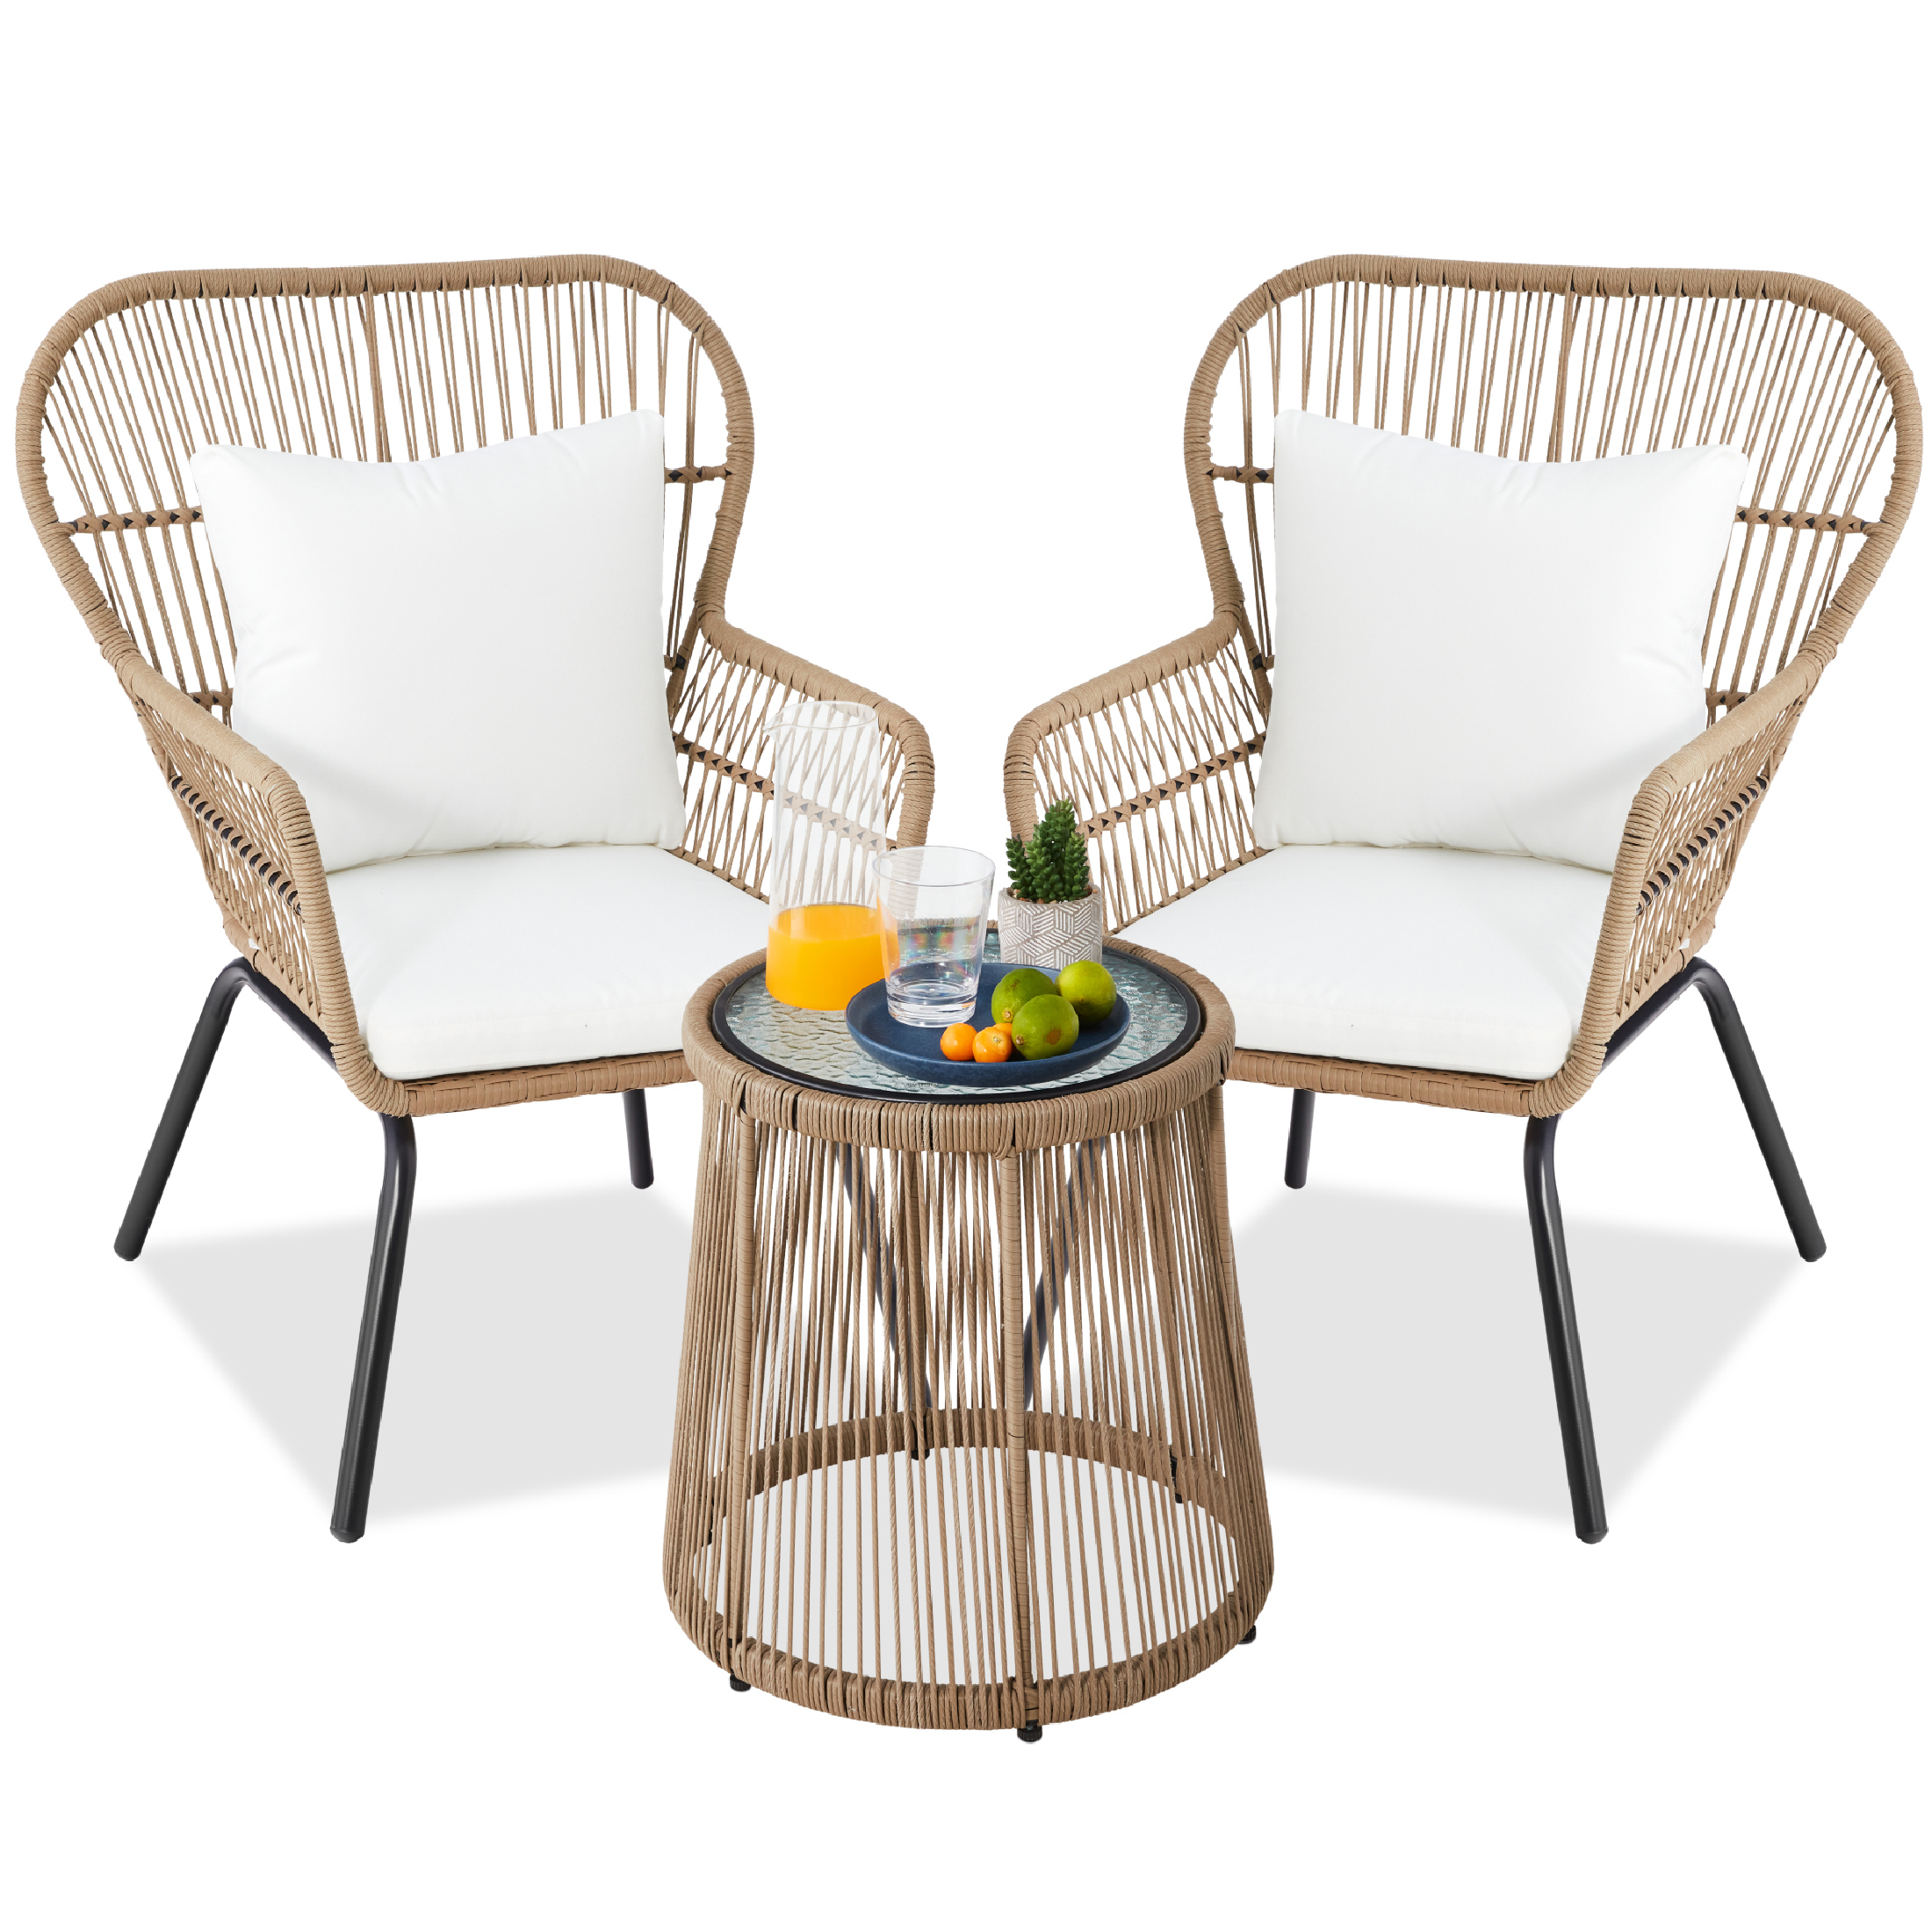 Best Choice Products 3-Piece Patio Conversation Bistro Set, Outdoor Wicker w/ 2 Chairs, Cushions, Side Table - Tan - image 1 of 7